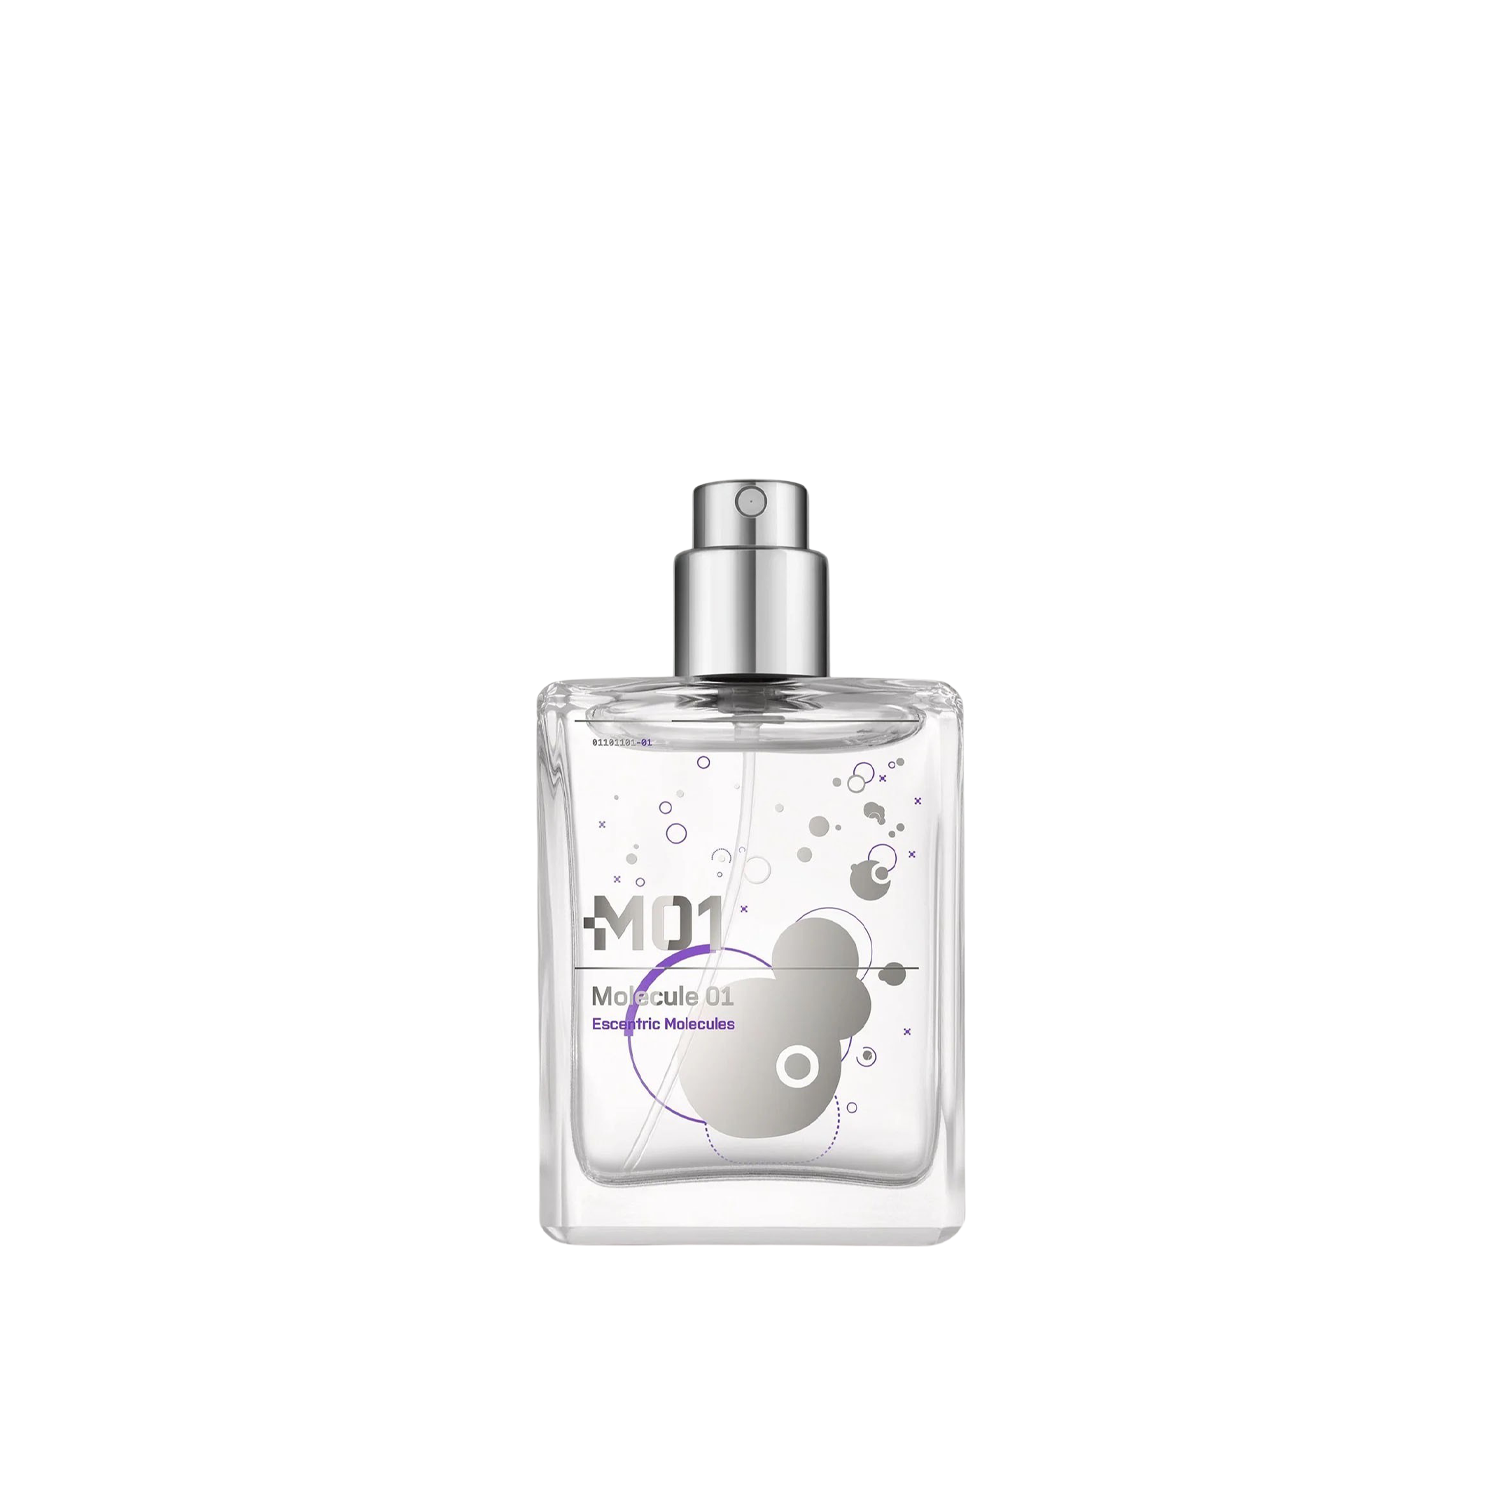 A practical 30ml refill bottle of Escentric Molecules' Molecule 01 Refill perfume on a white background.